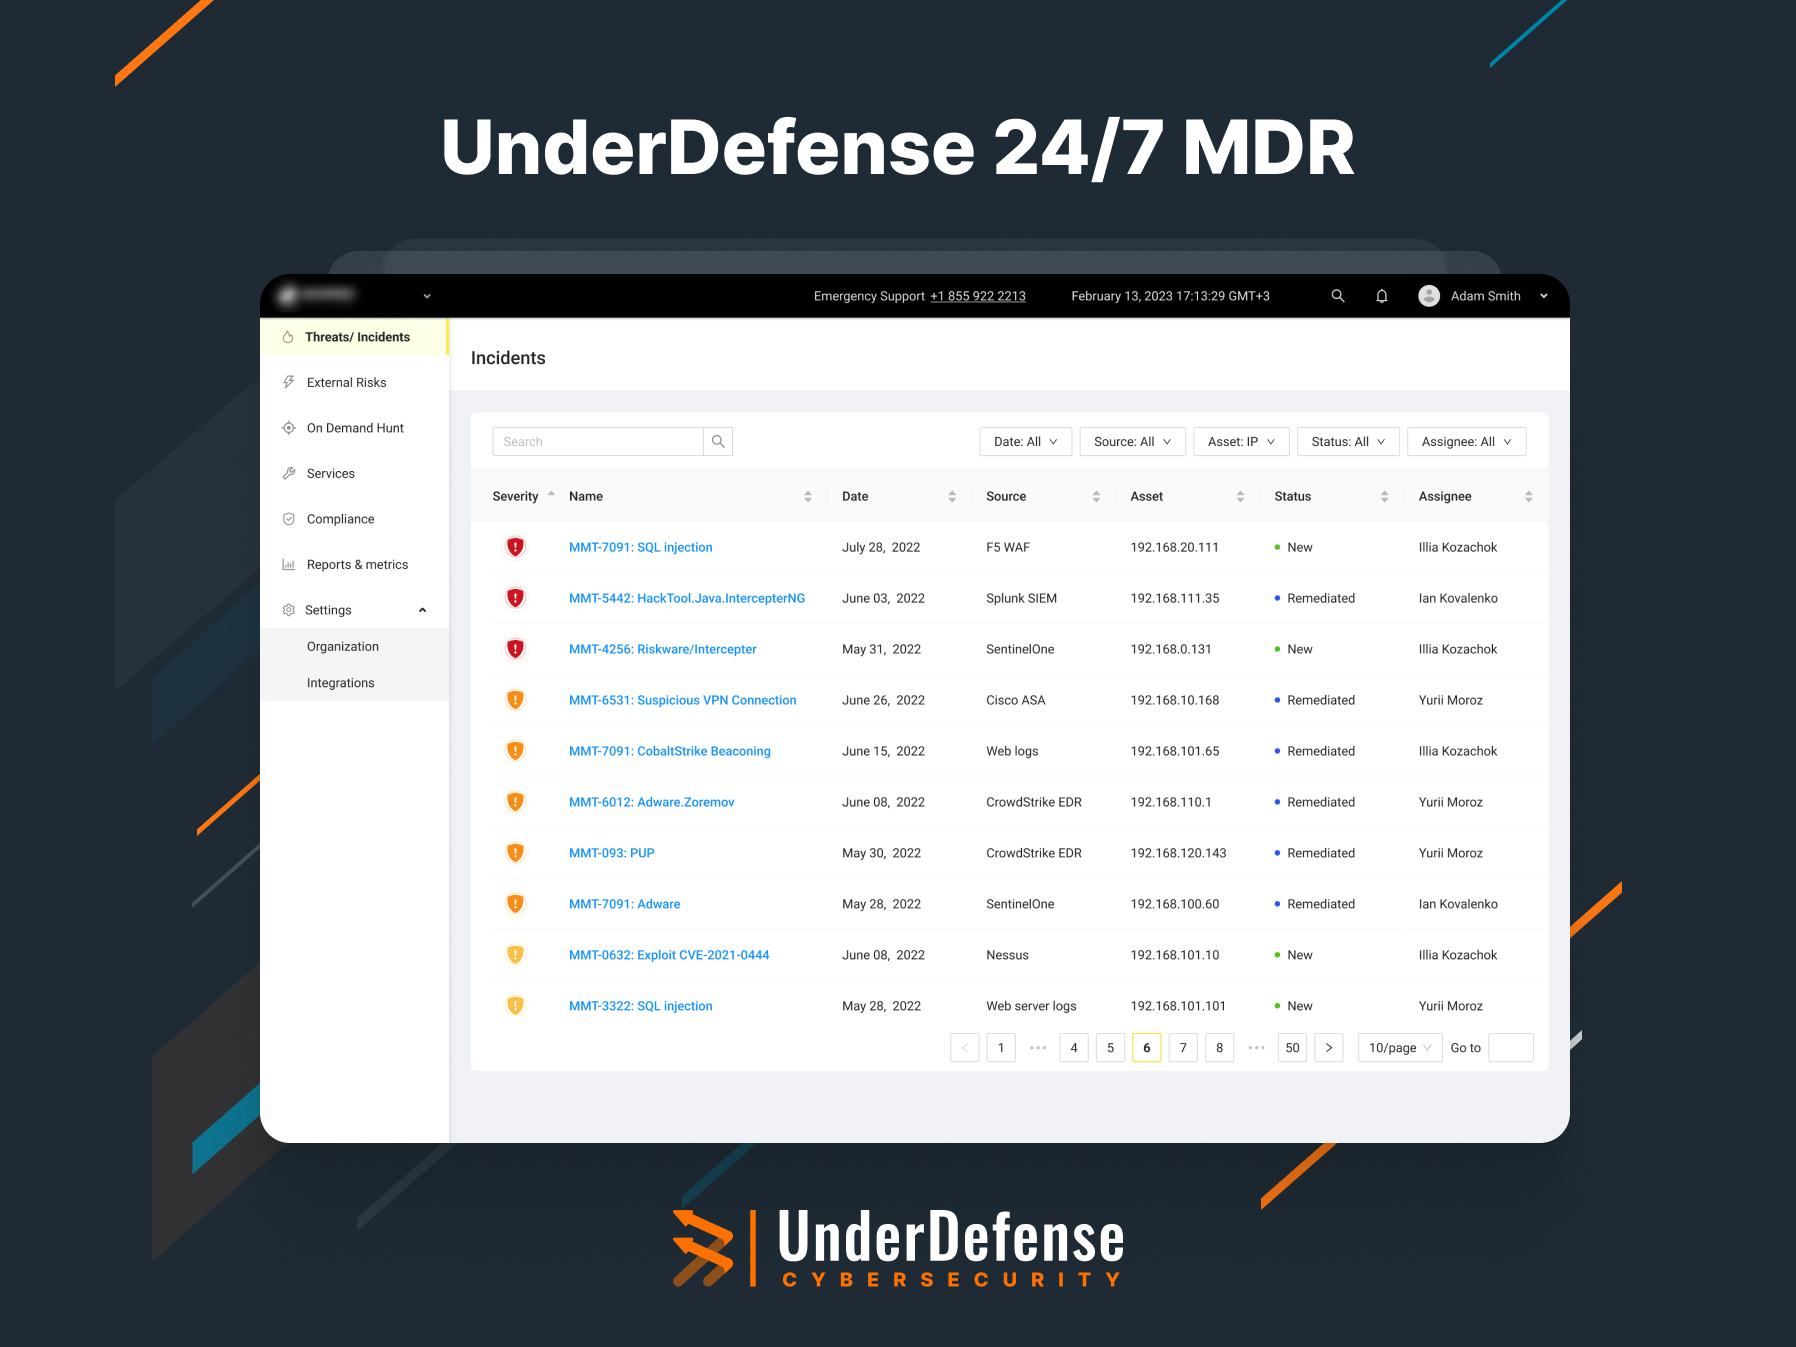 UnderDefense MAXI Software - Stay ahead of threats with clear explanations. Detect incidents instantly and take immediate action for better security.